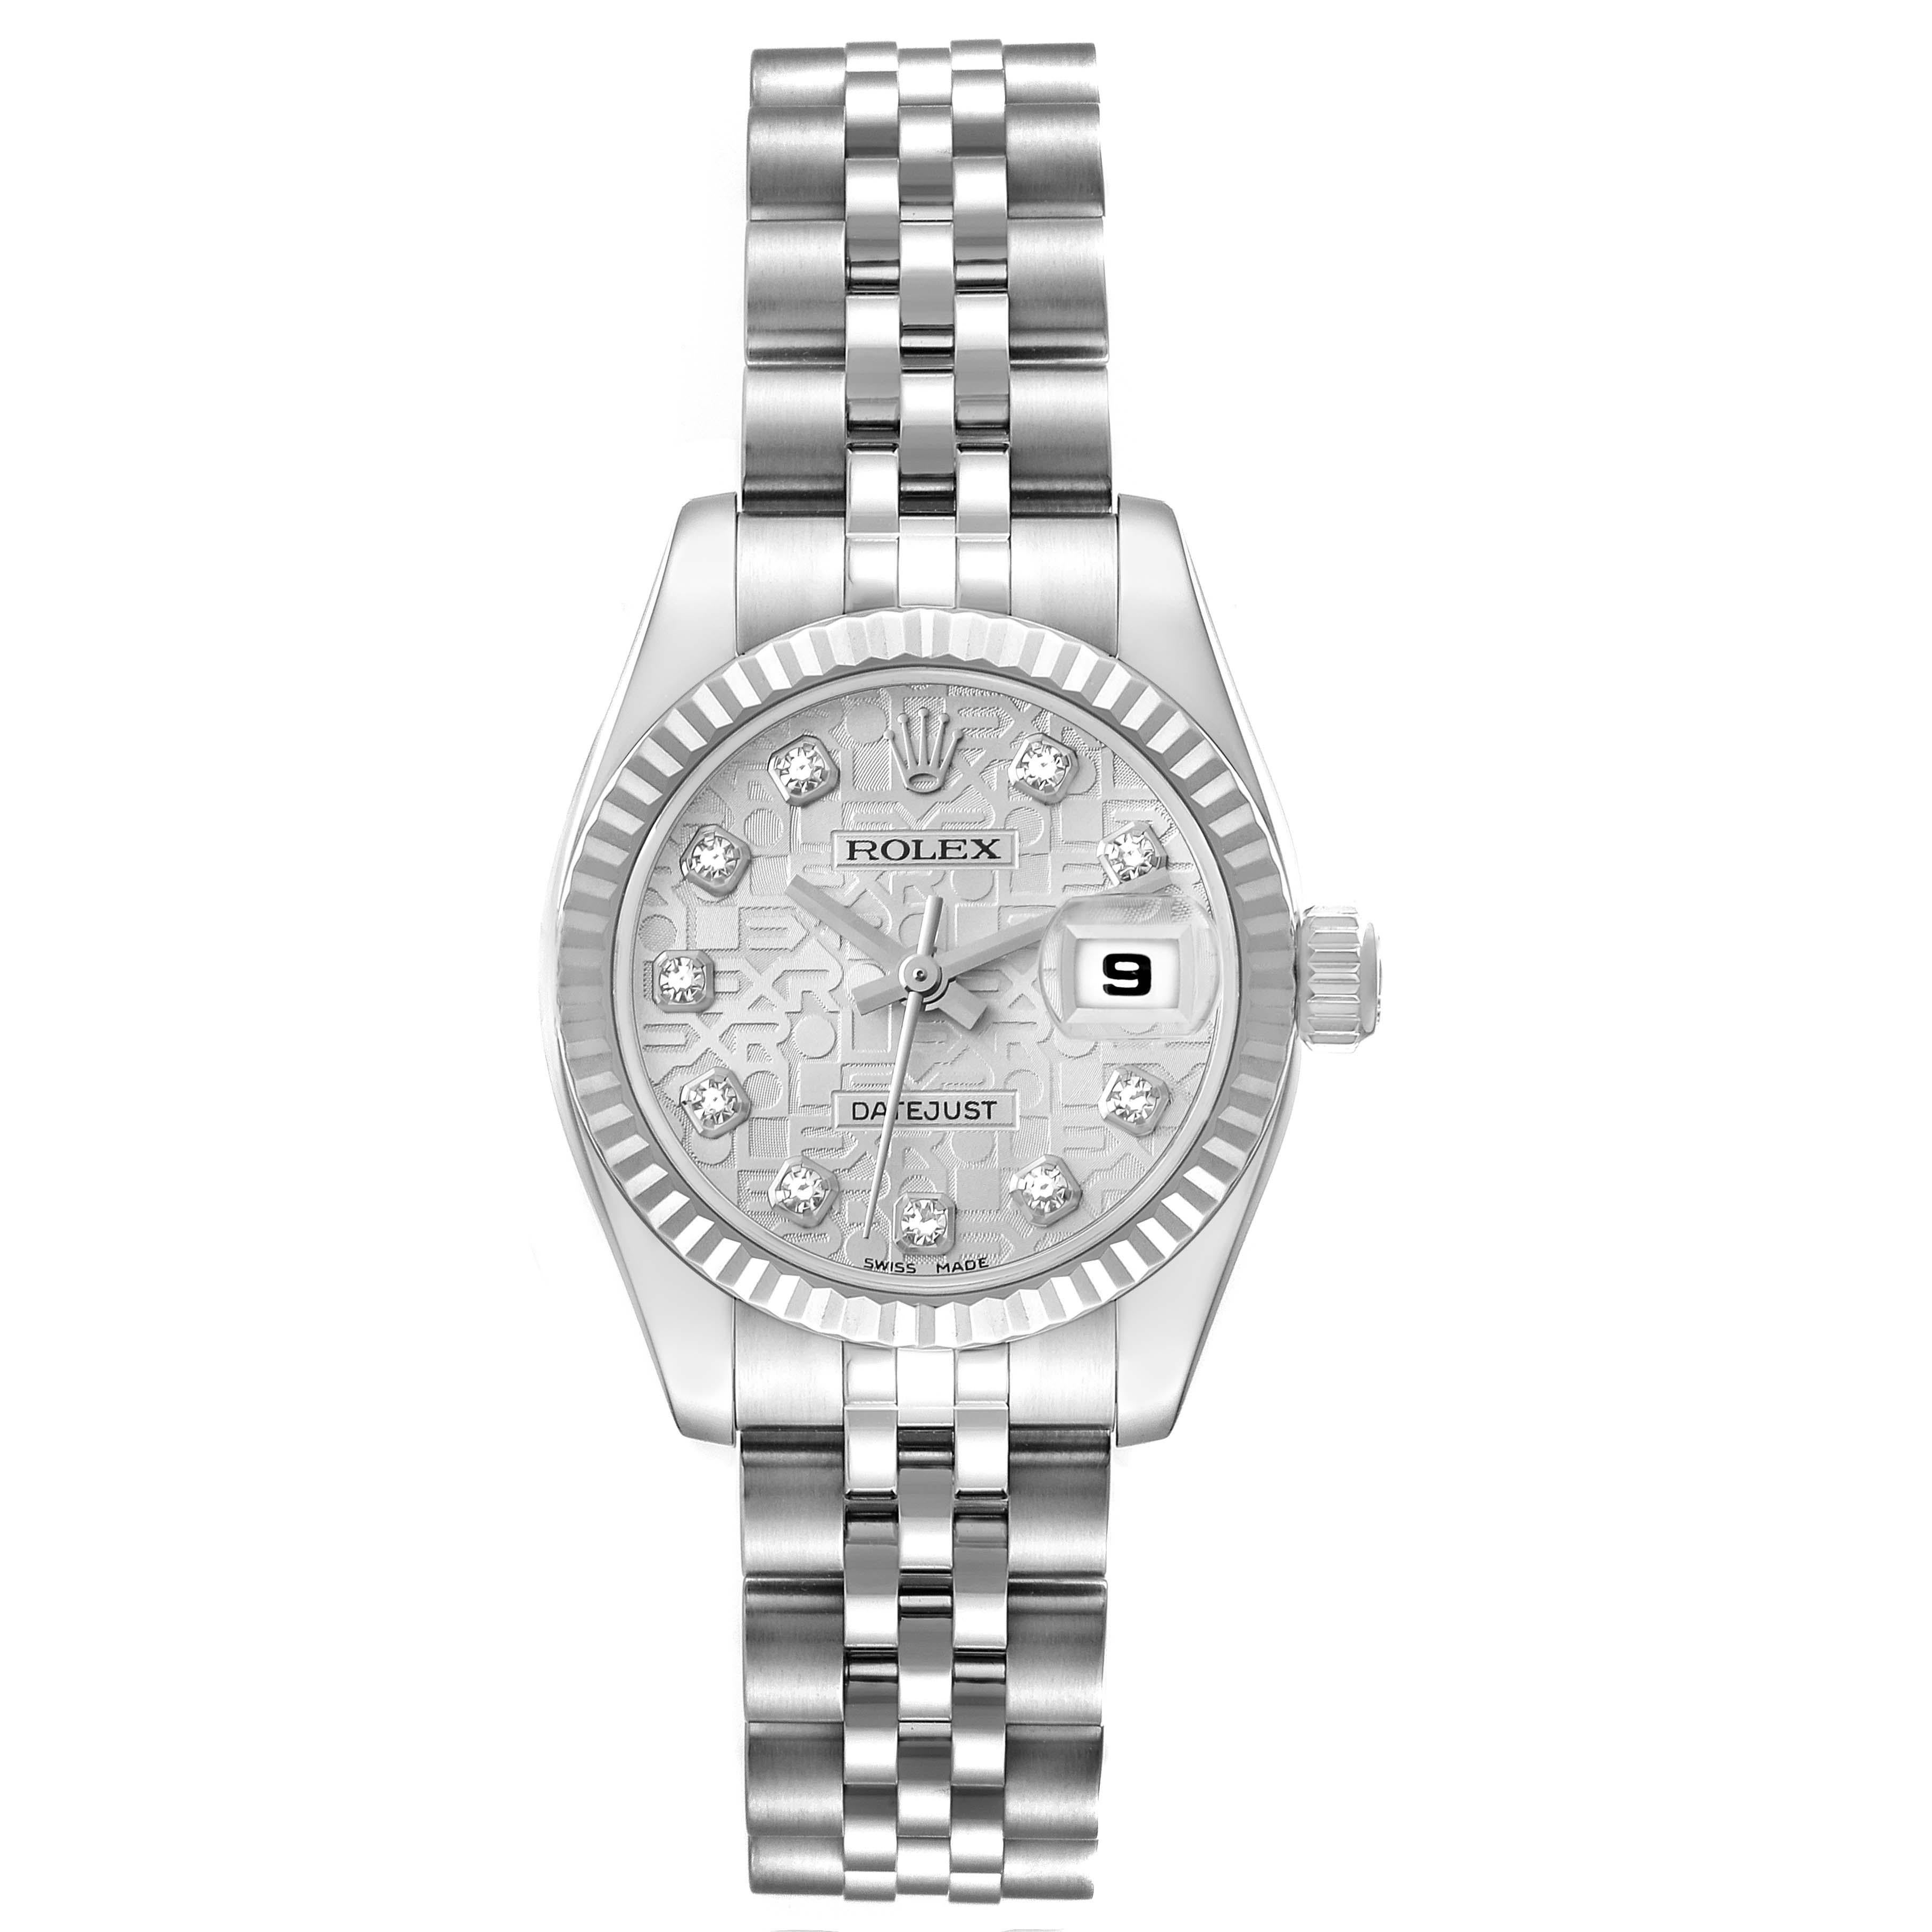 Rolex Datejust Steel White Gold Diamond Dial Ladies Watch 179174 Box Card For Sale 1